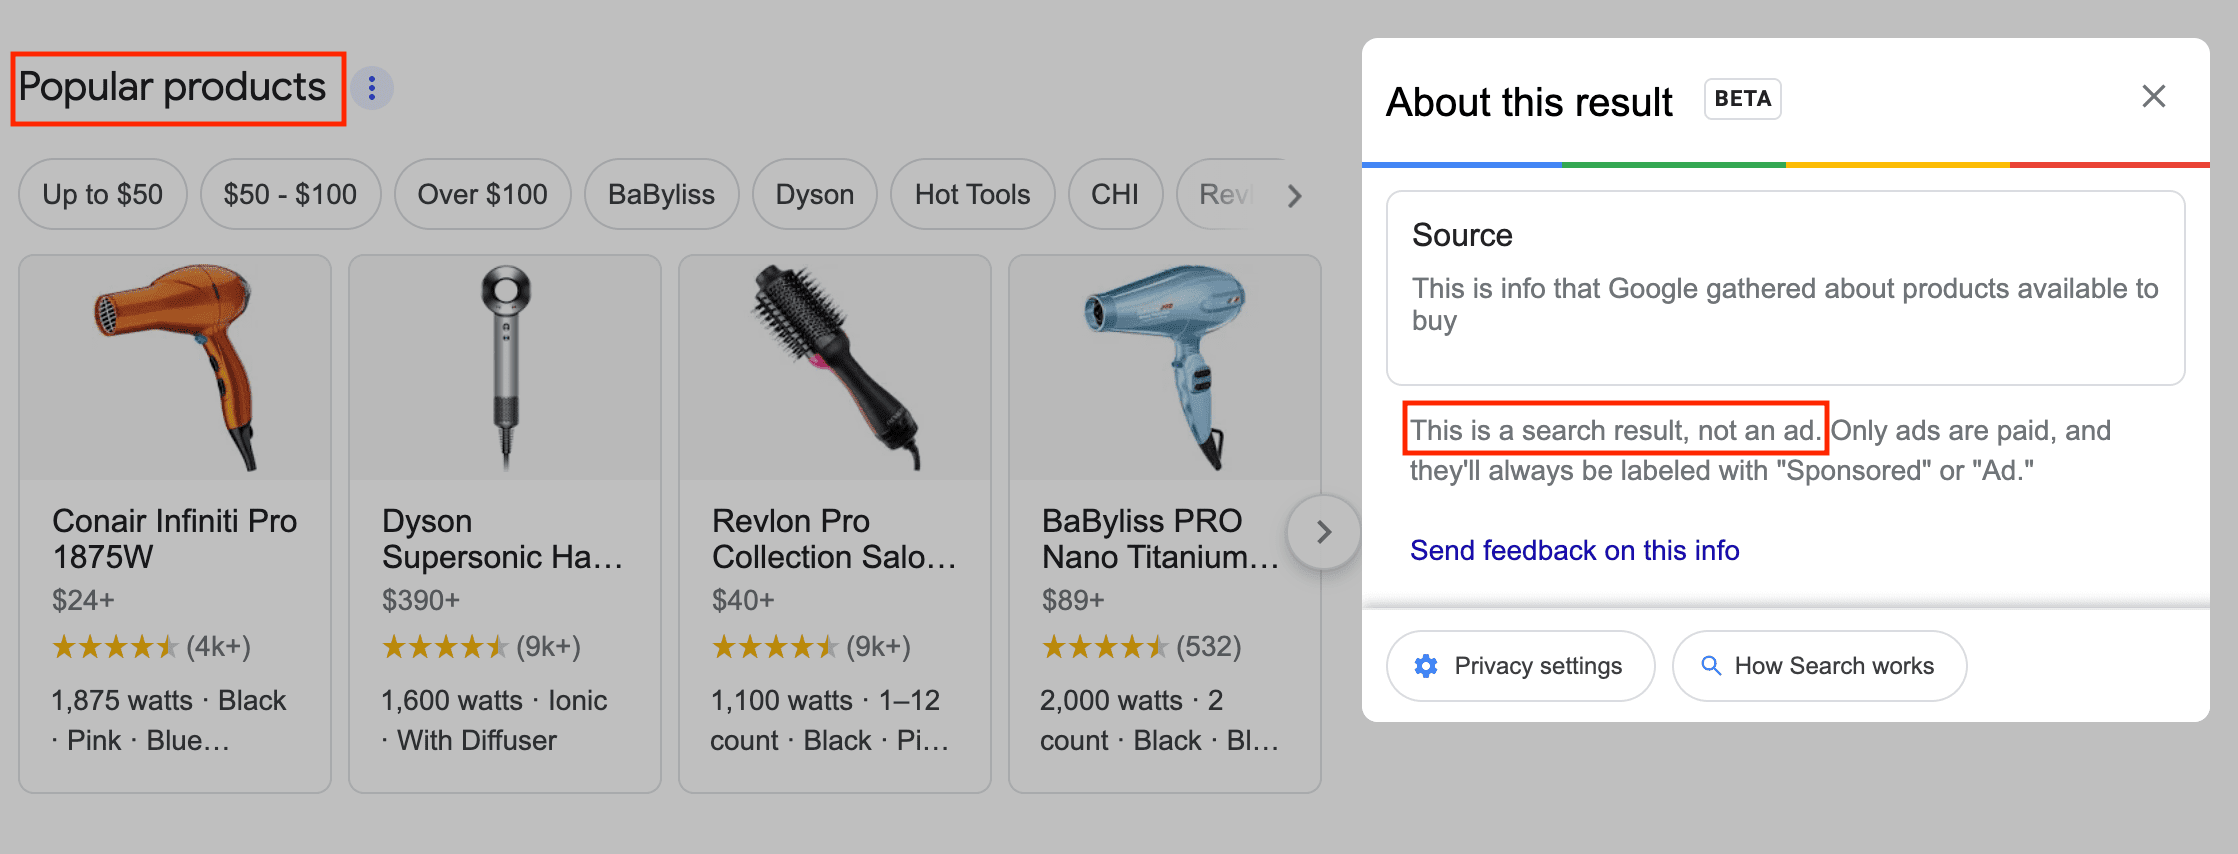 An example of Popular Products enriched search result